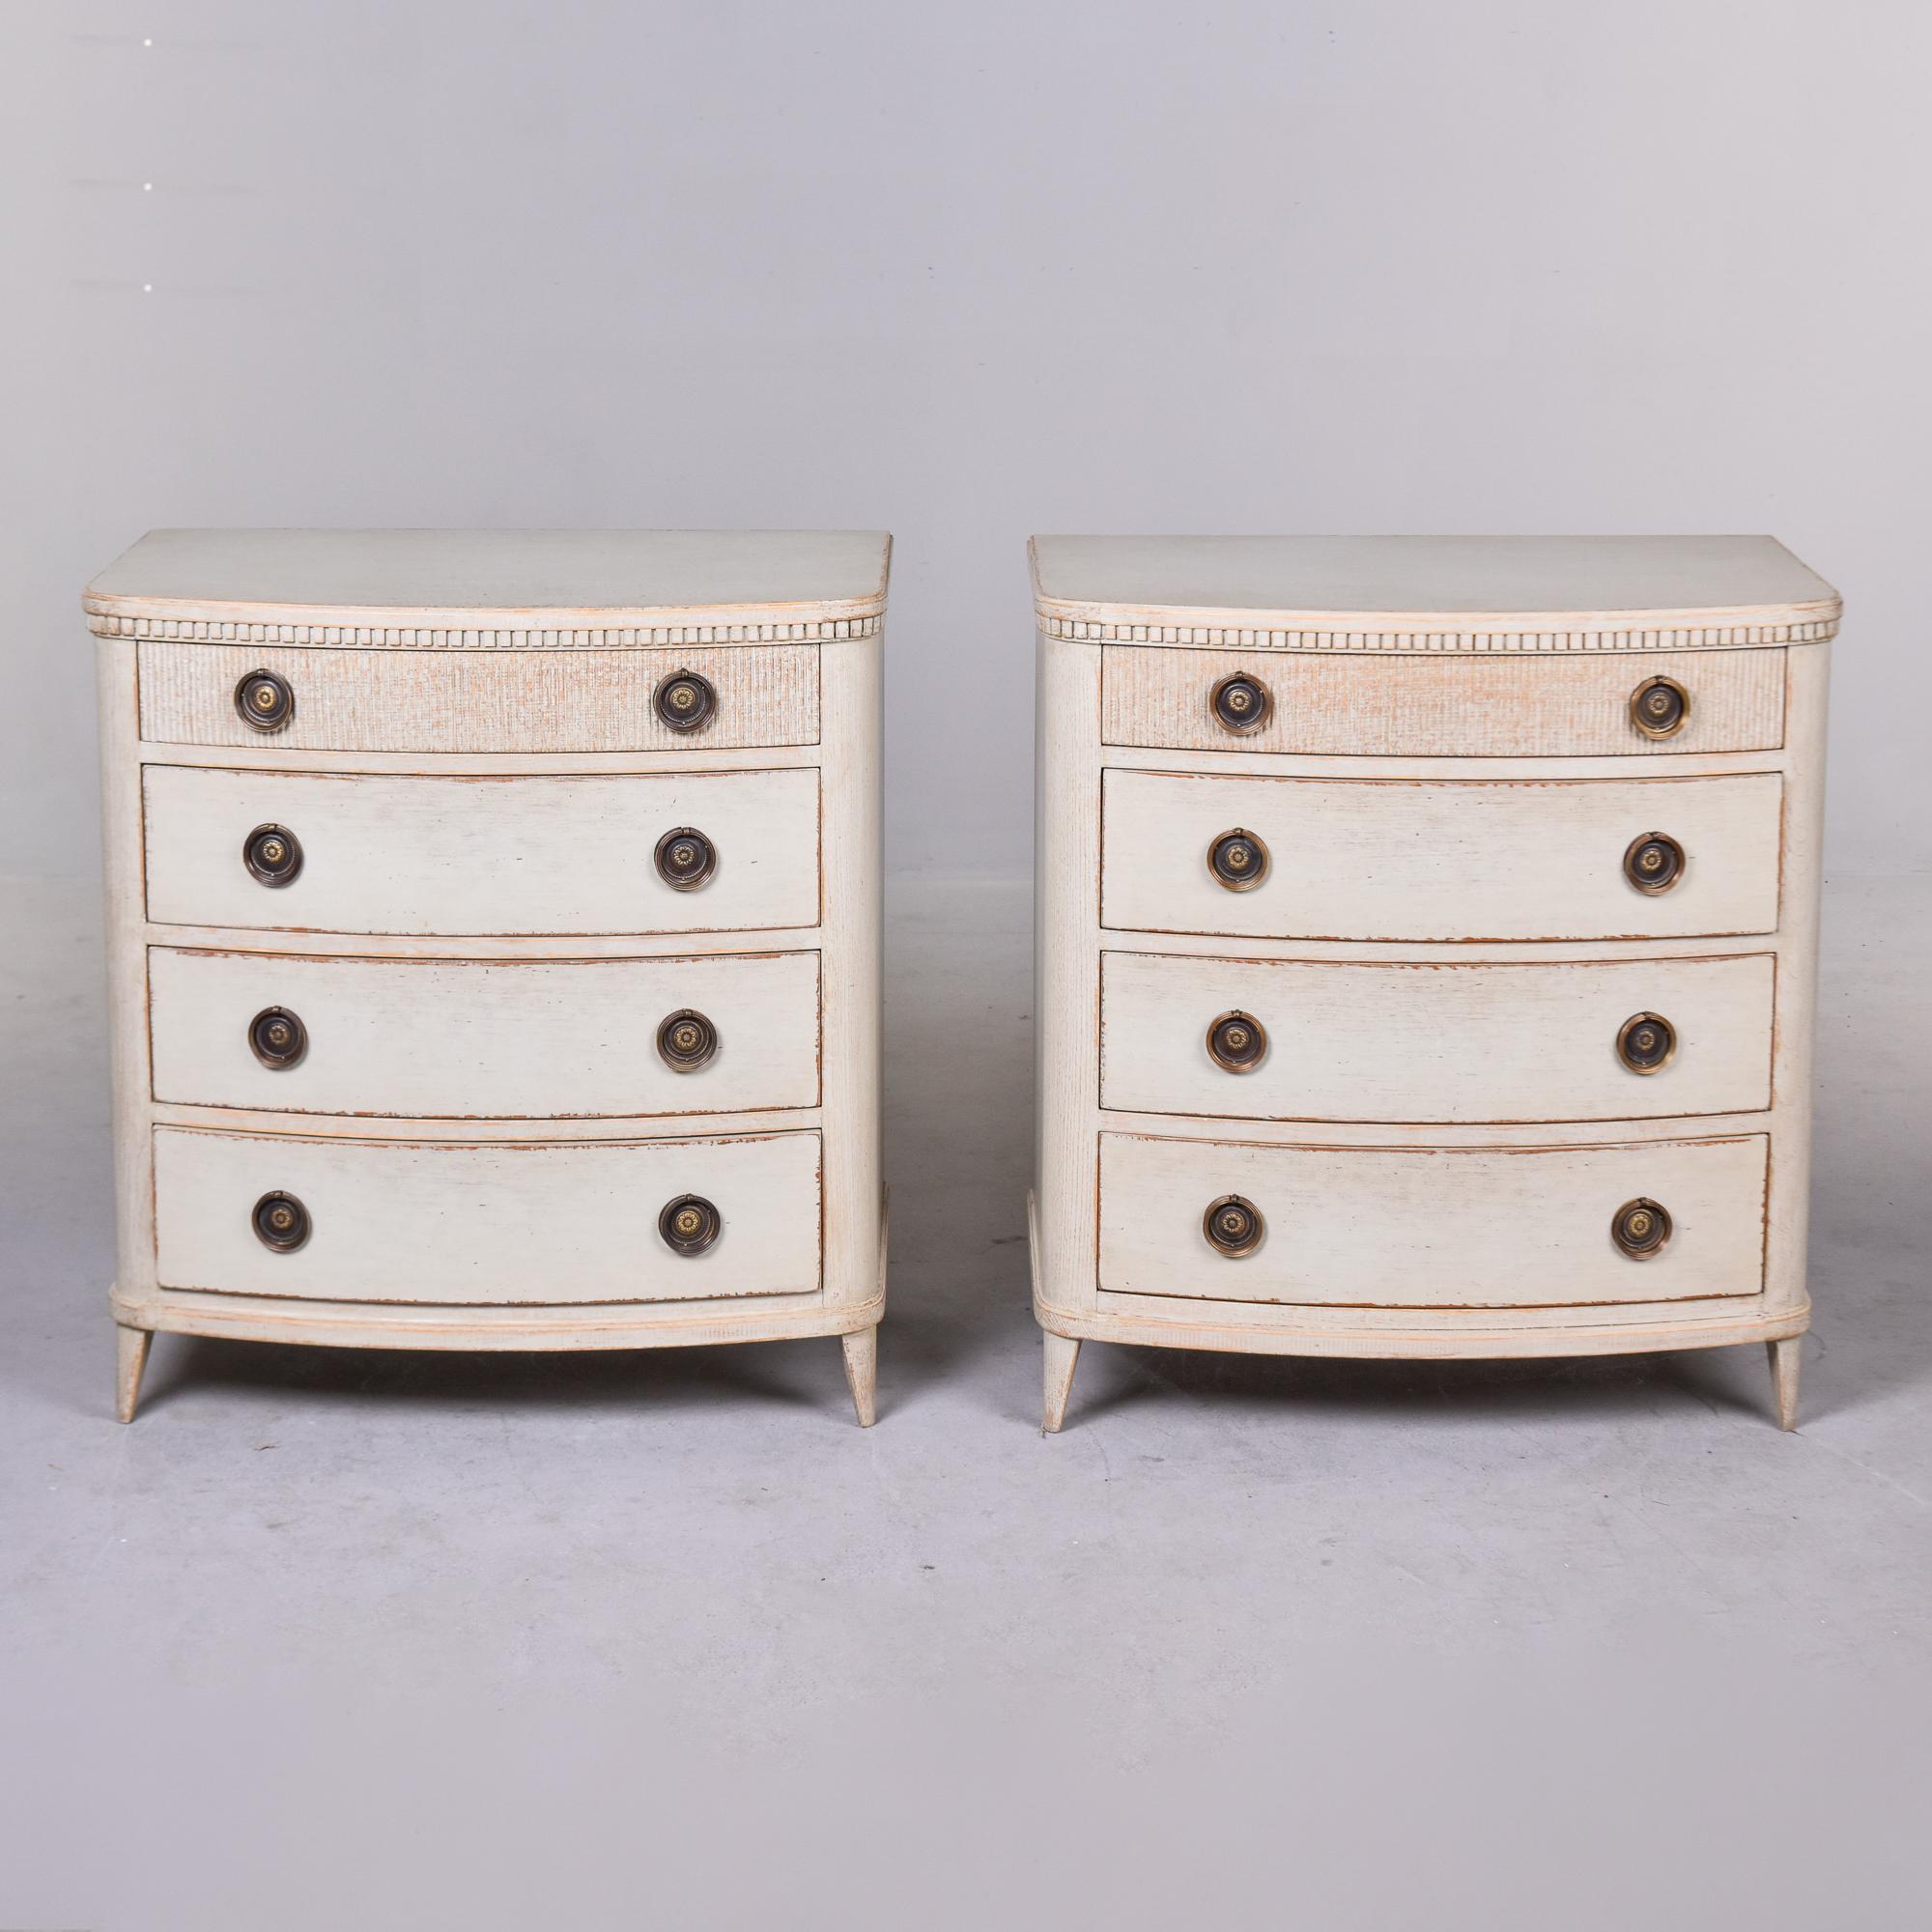 Pair of Swedish four drawer chests with antique white painted finish. Details include top drawers with reeded fronts, dental trim around top edge, tapered and angled front legs and brass ring-pull hardware. Unknown maker. Versatile size and function